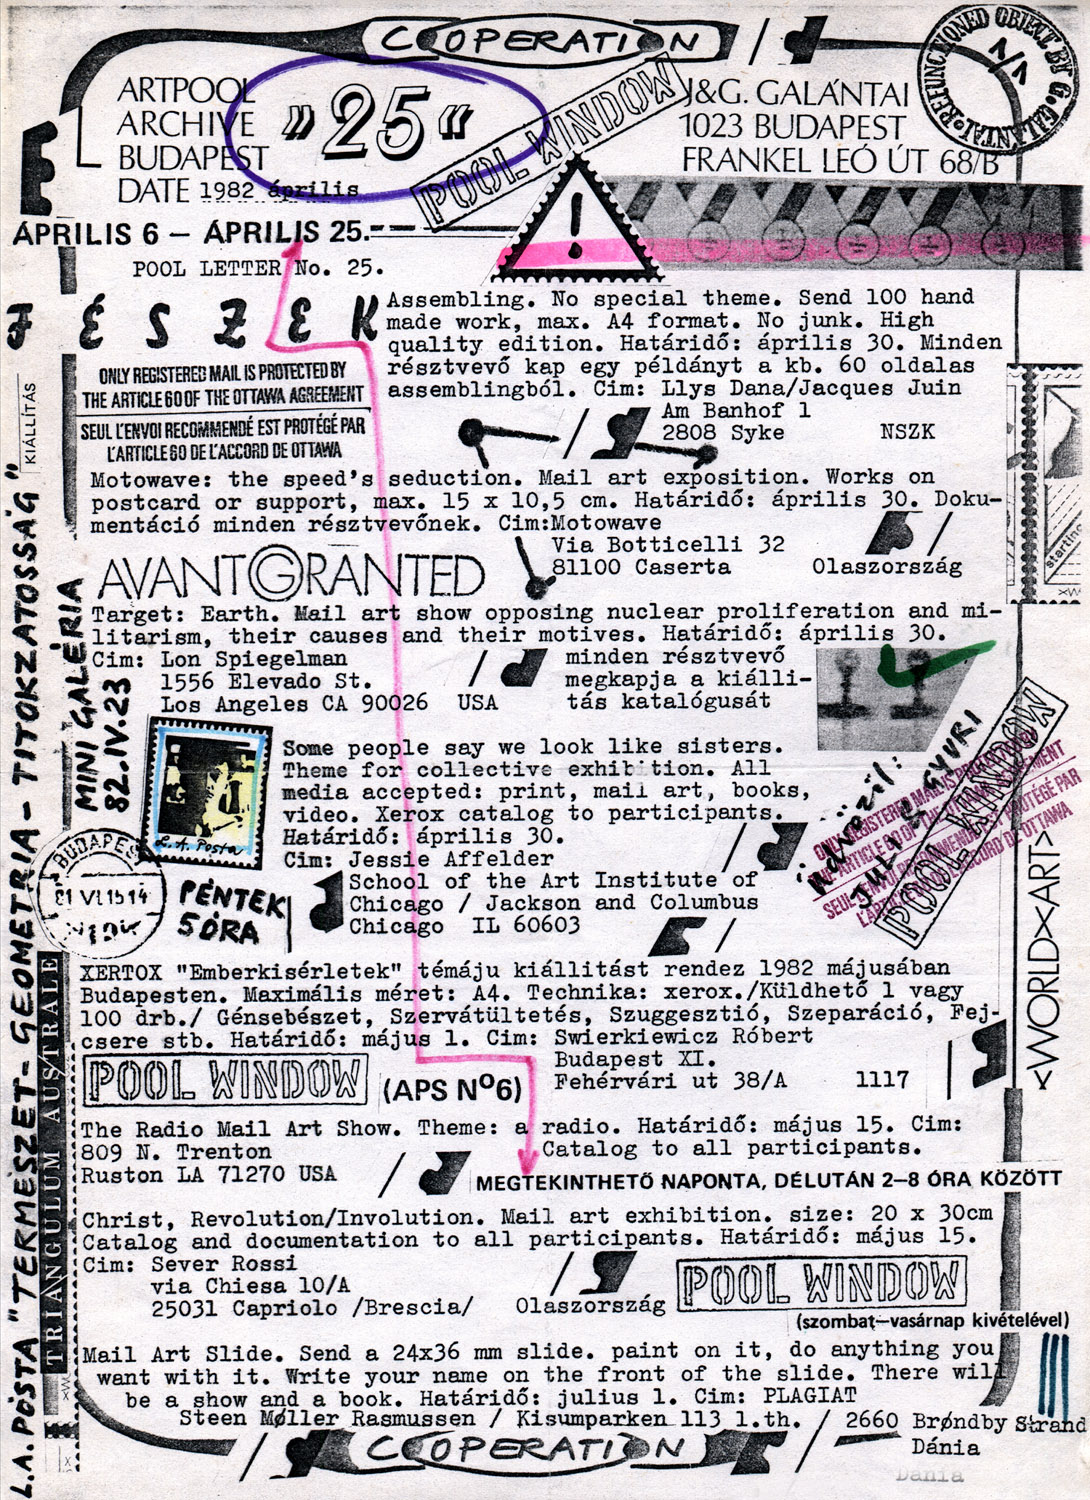 POOLWINDOW No. 25., April 1982, mail art newsletter, Artpool, Budapest, A4, photocopy, rubber stamp